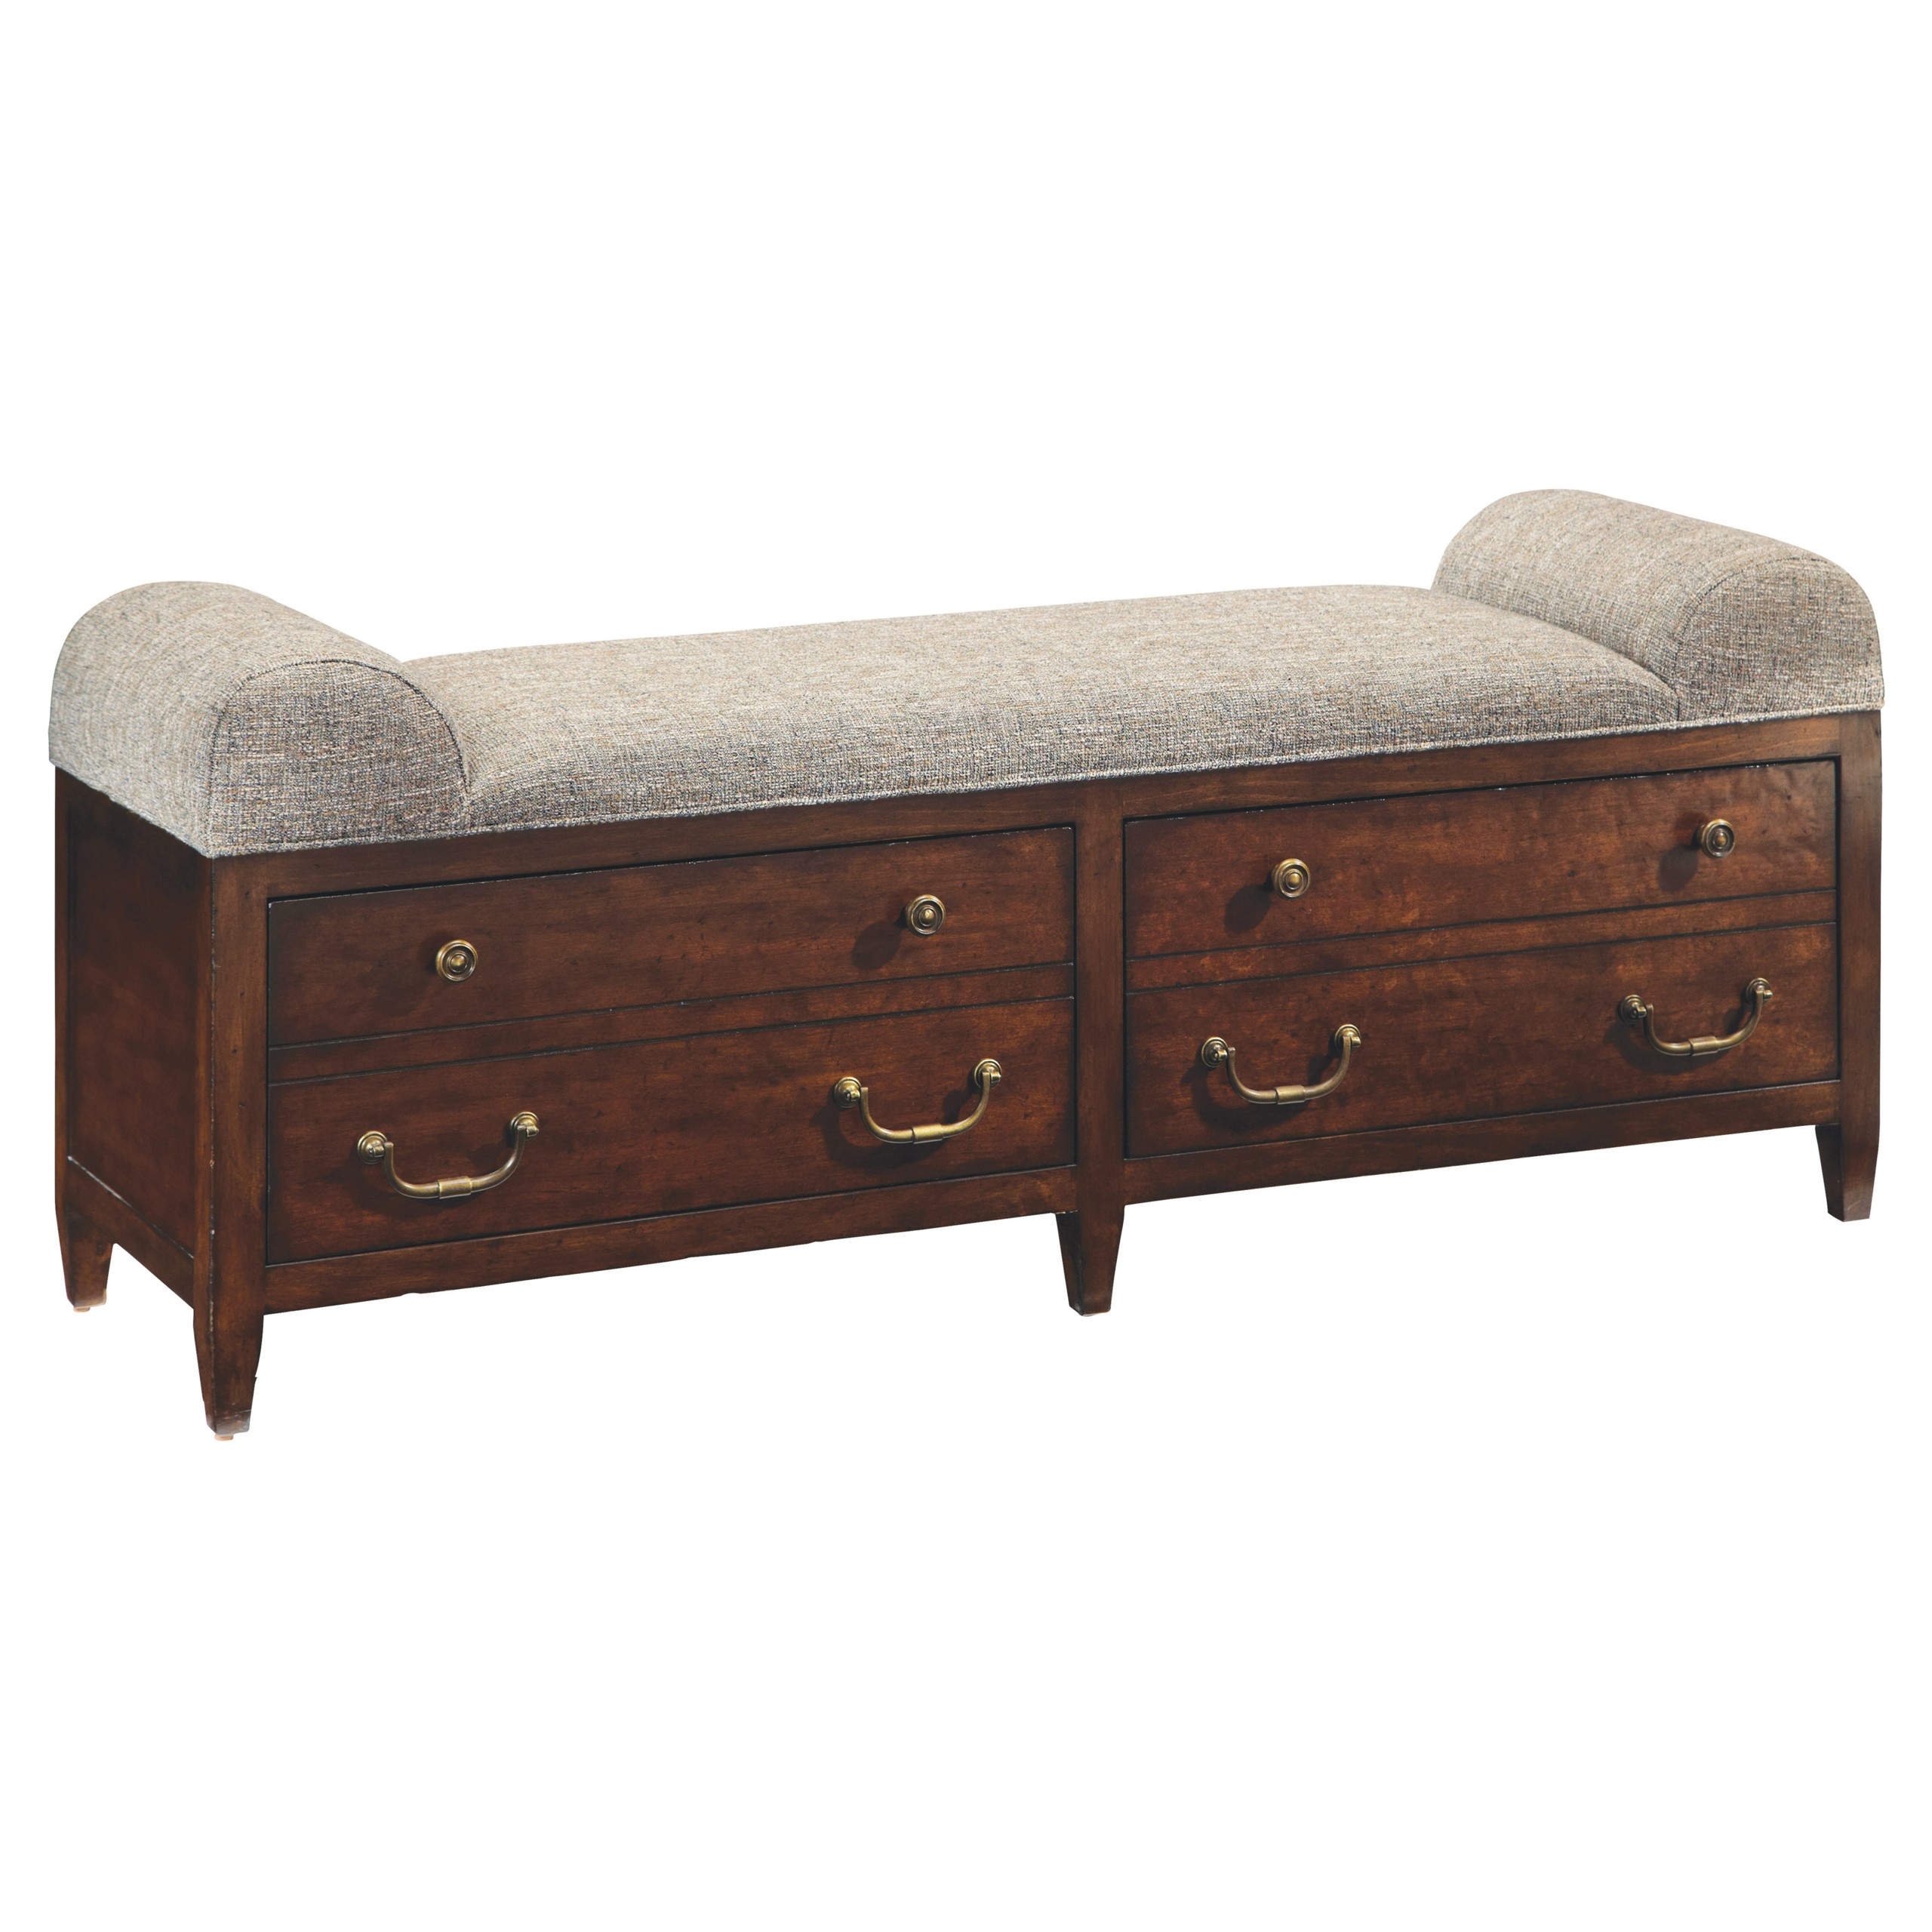 A r t furniture egerton storage bench with drawers